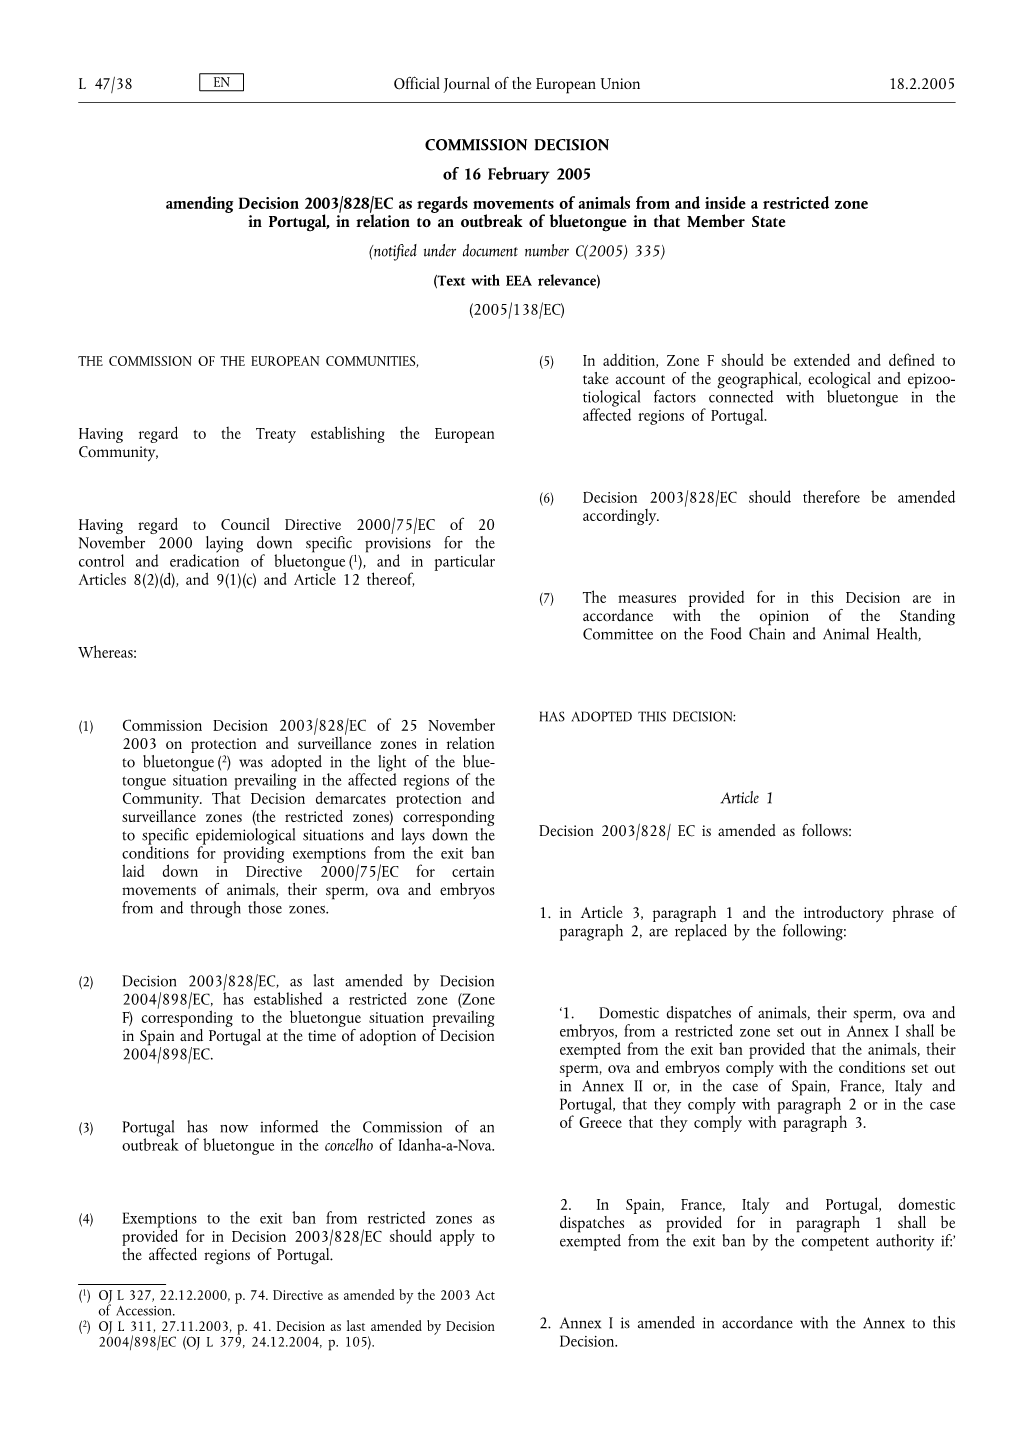 COMMISSION DECISION of 16 February 2005 Amending Decision